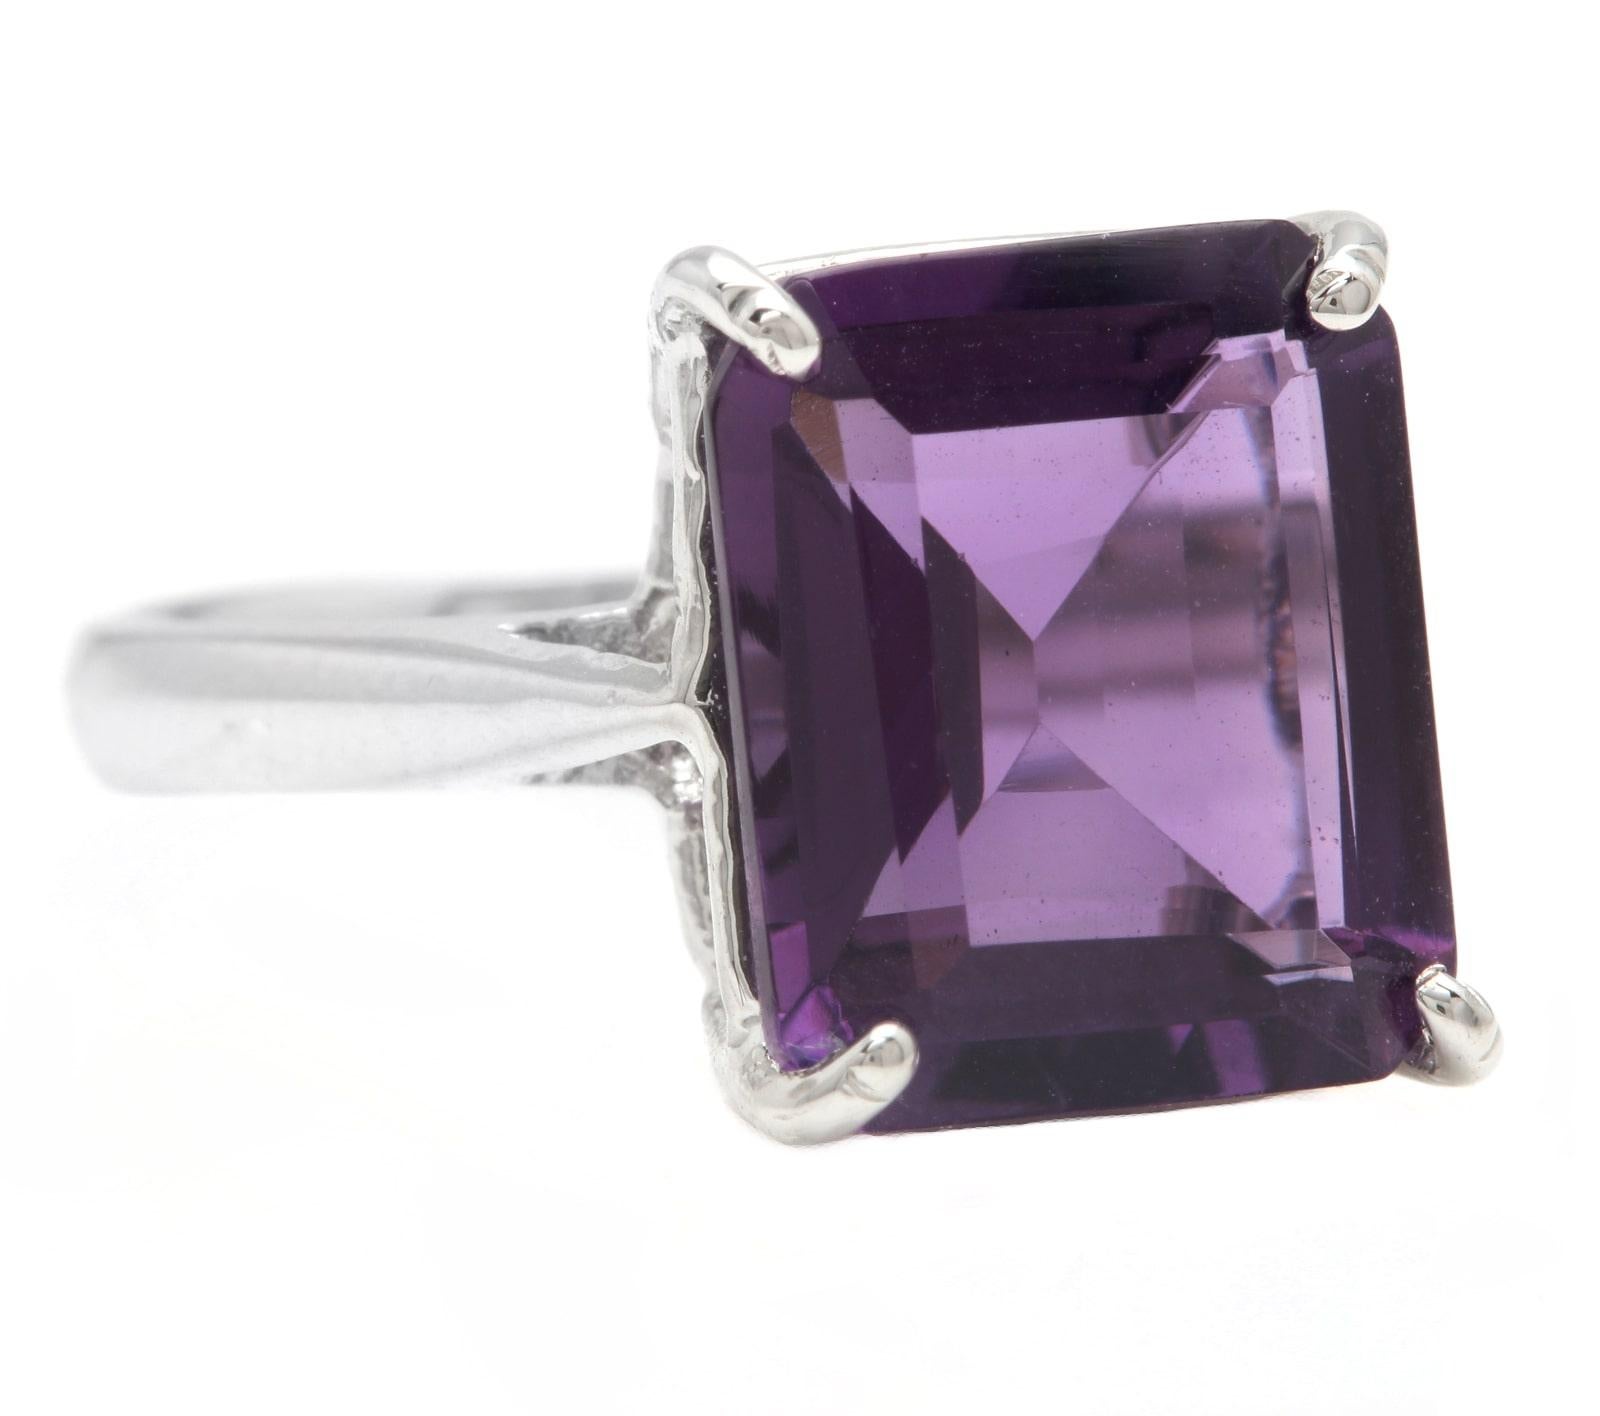 5.50 Carats Exquisite Natural Amethyst 14K Solid White Gold Ring

Total Natural Amethyst Weight is: Approx. 5.50 Carats 

Amethyst Measures: Approx. 12.00 x 10.00mm

Ring size: 5.5 ( Free Sizing available)

Ring total weight: Approx. 3.8